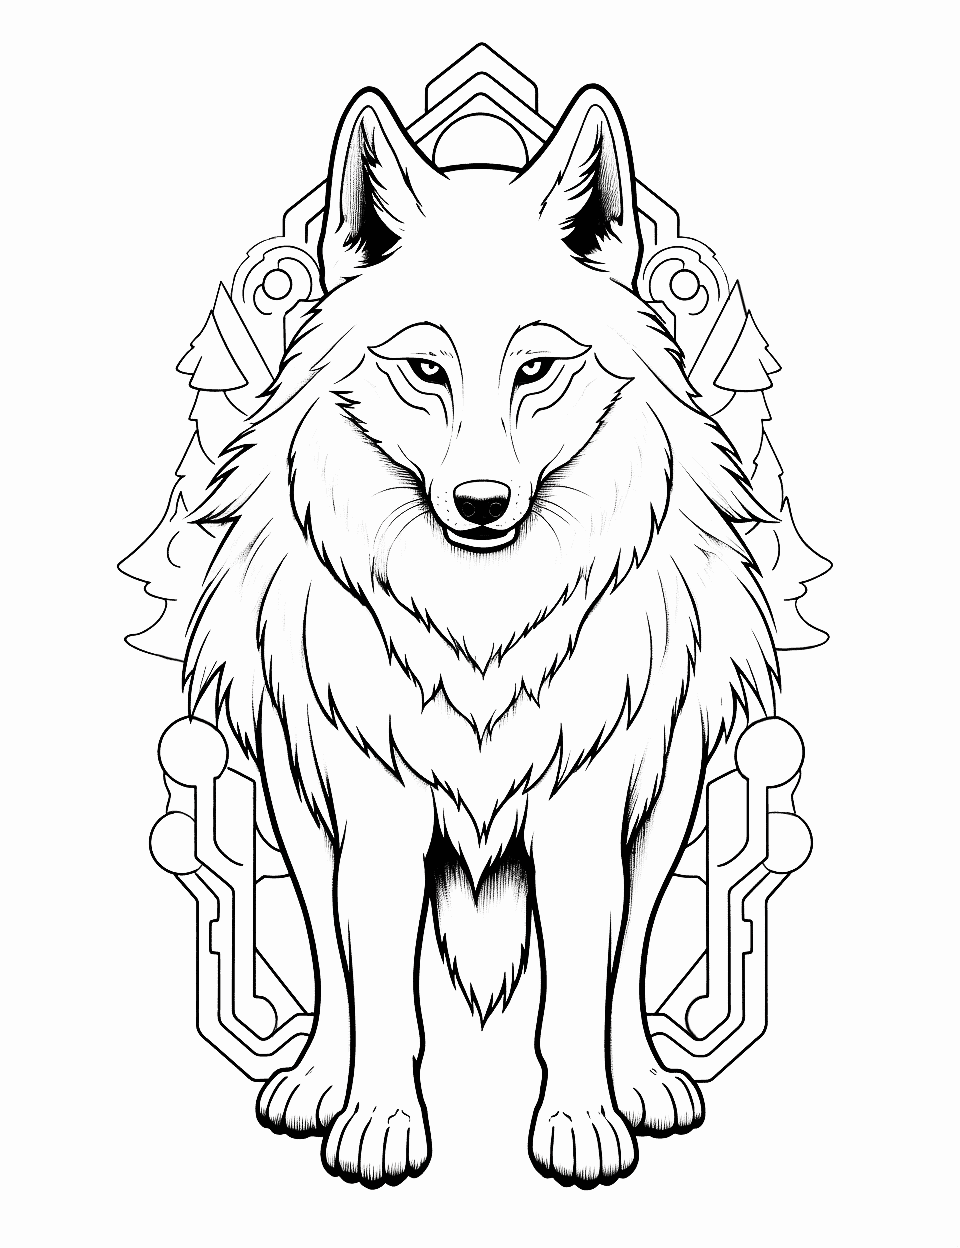 She-Wolf Shaman Wolf Coloring Page - A female wolf surrounded by mystical symbols, invoking ancient spirits.